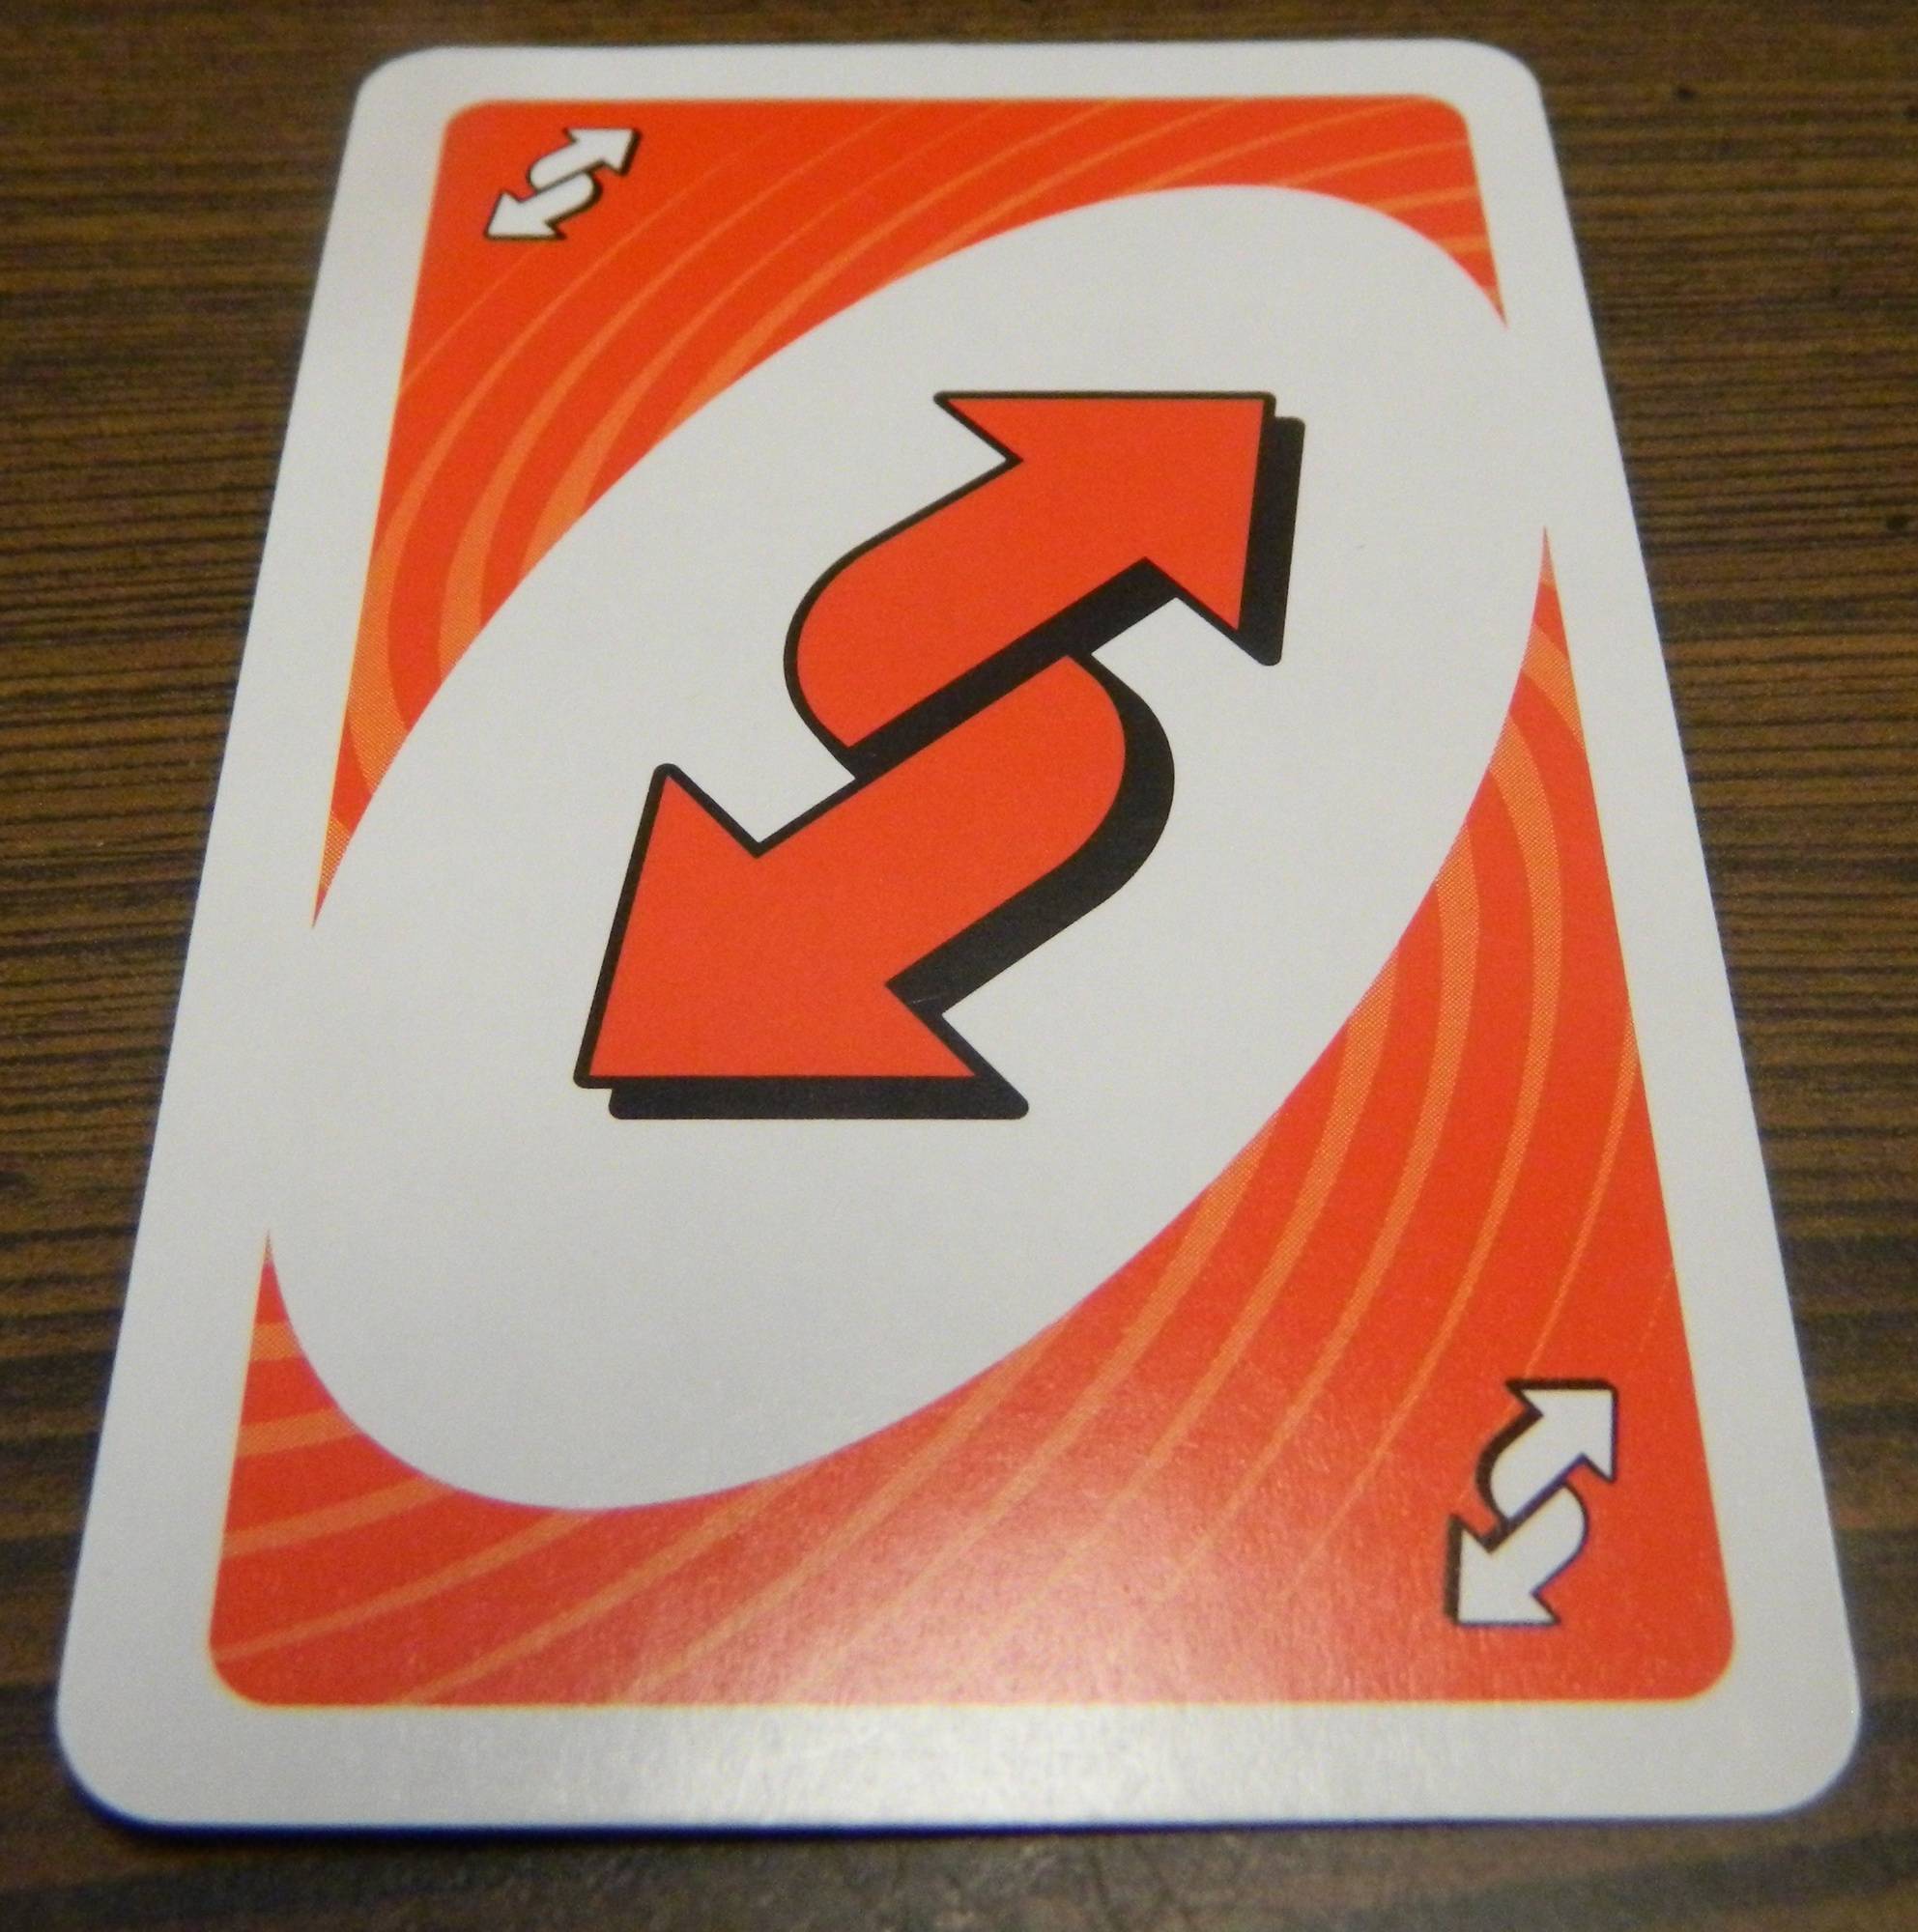 Uno Cards Reverse Meaning